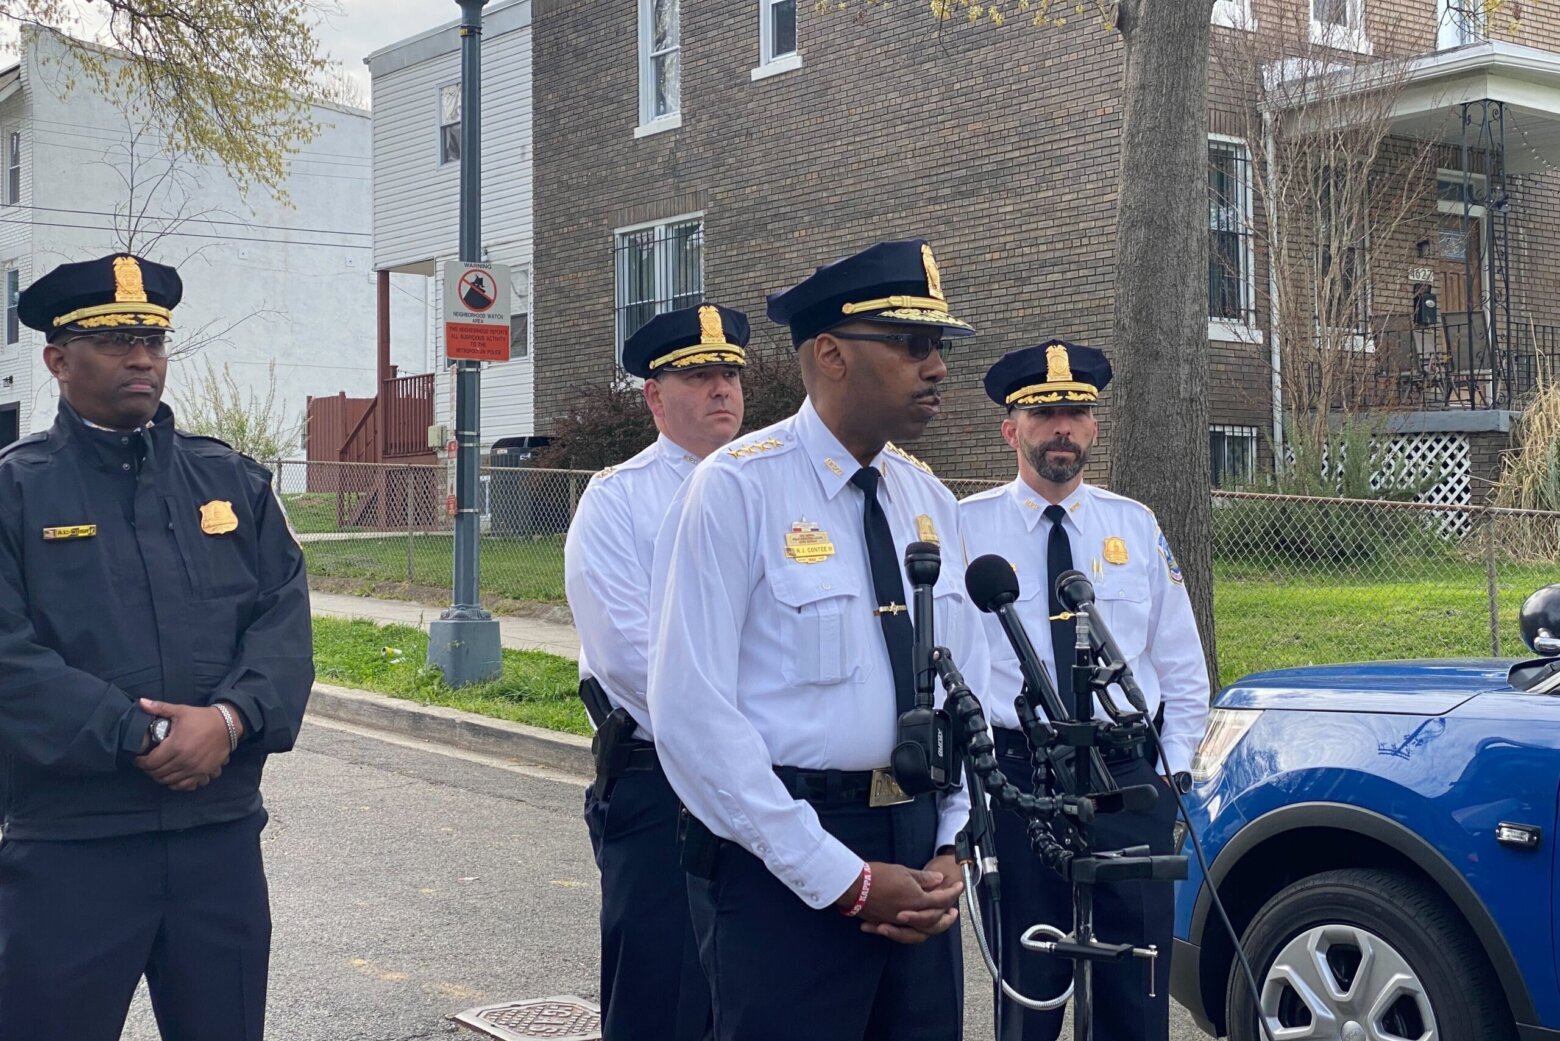 police shoot, kill armed woman 'acting erratically' in Petworth WTOP News